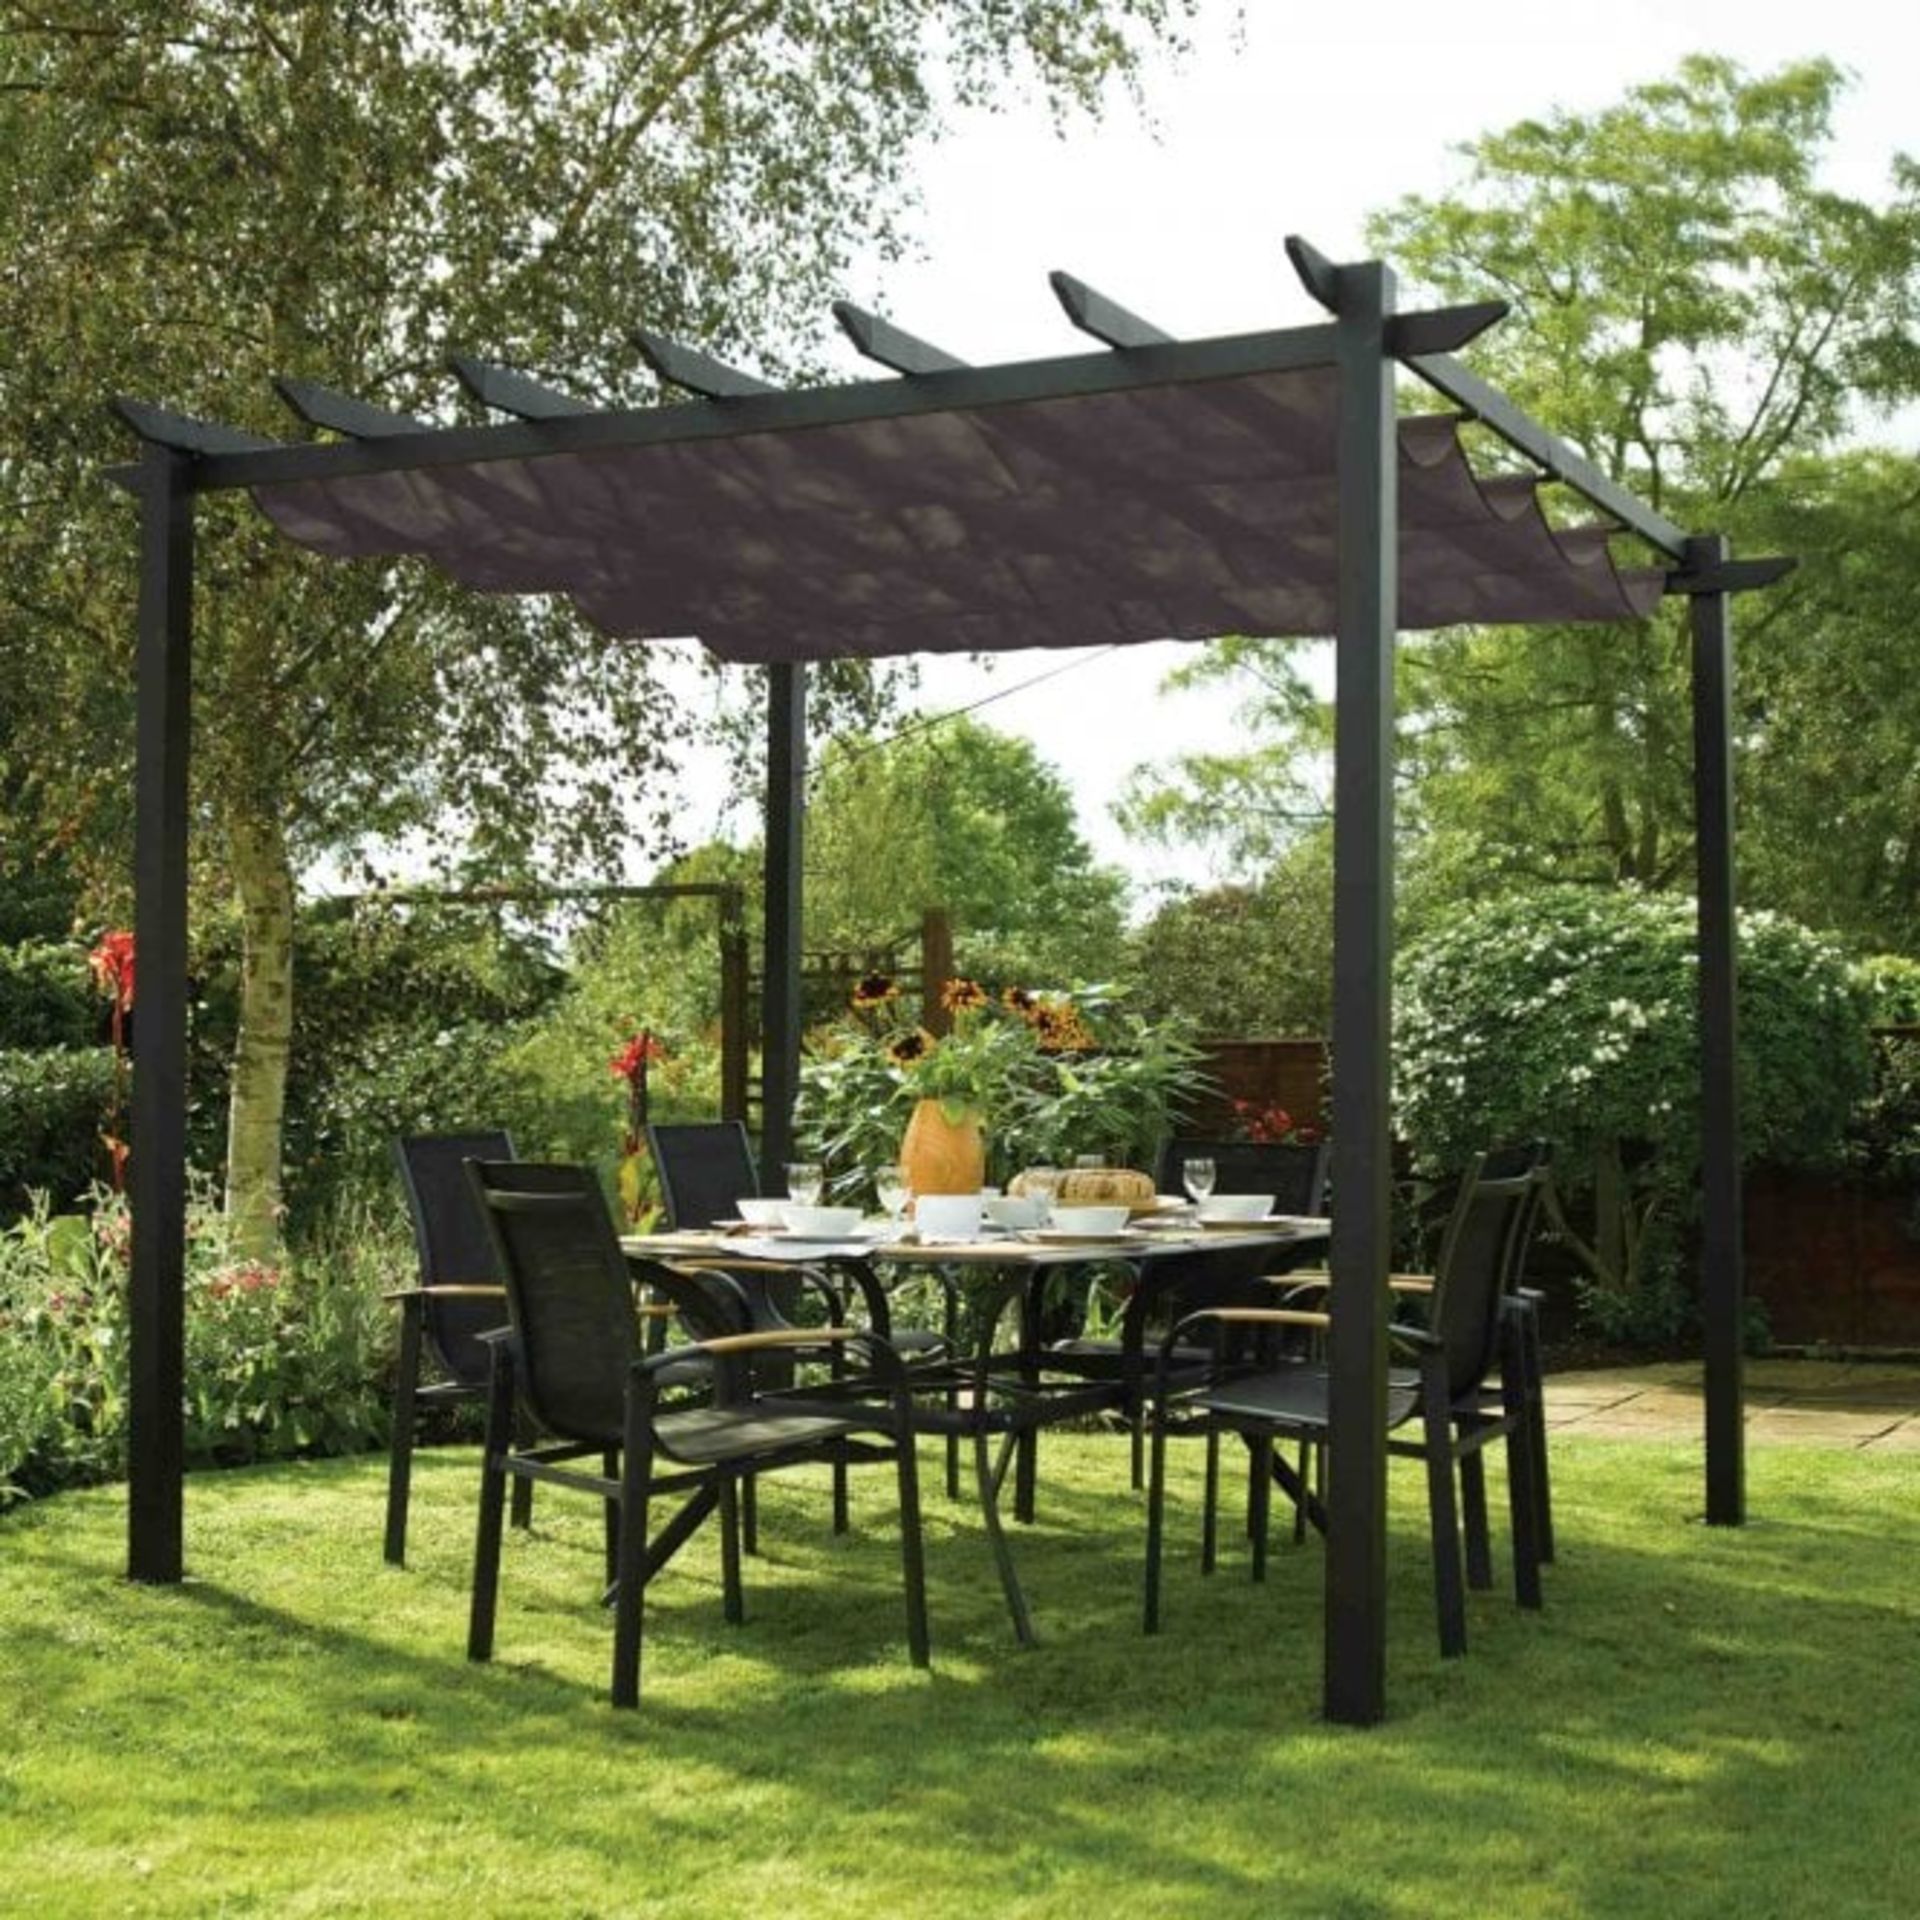 V Brand New 3m x 3m Aluminium Charcoal Grey Pergola With Zipped Cover - Sturdy Design And Folds Back - Image 2 of 4